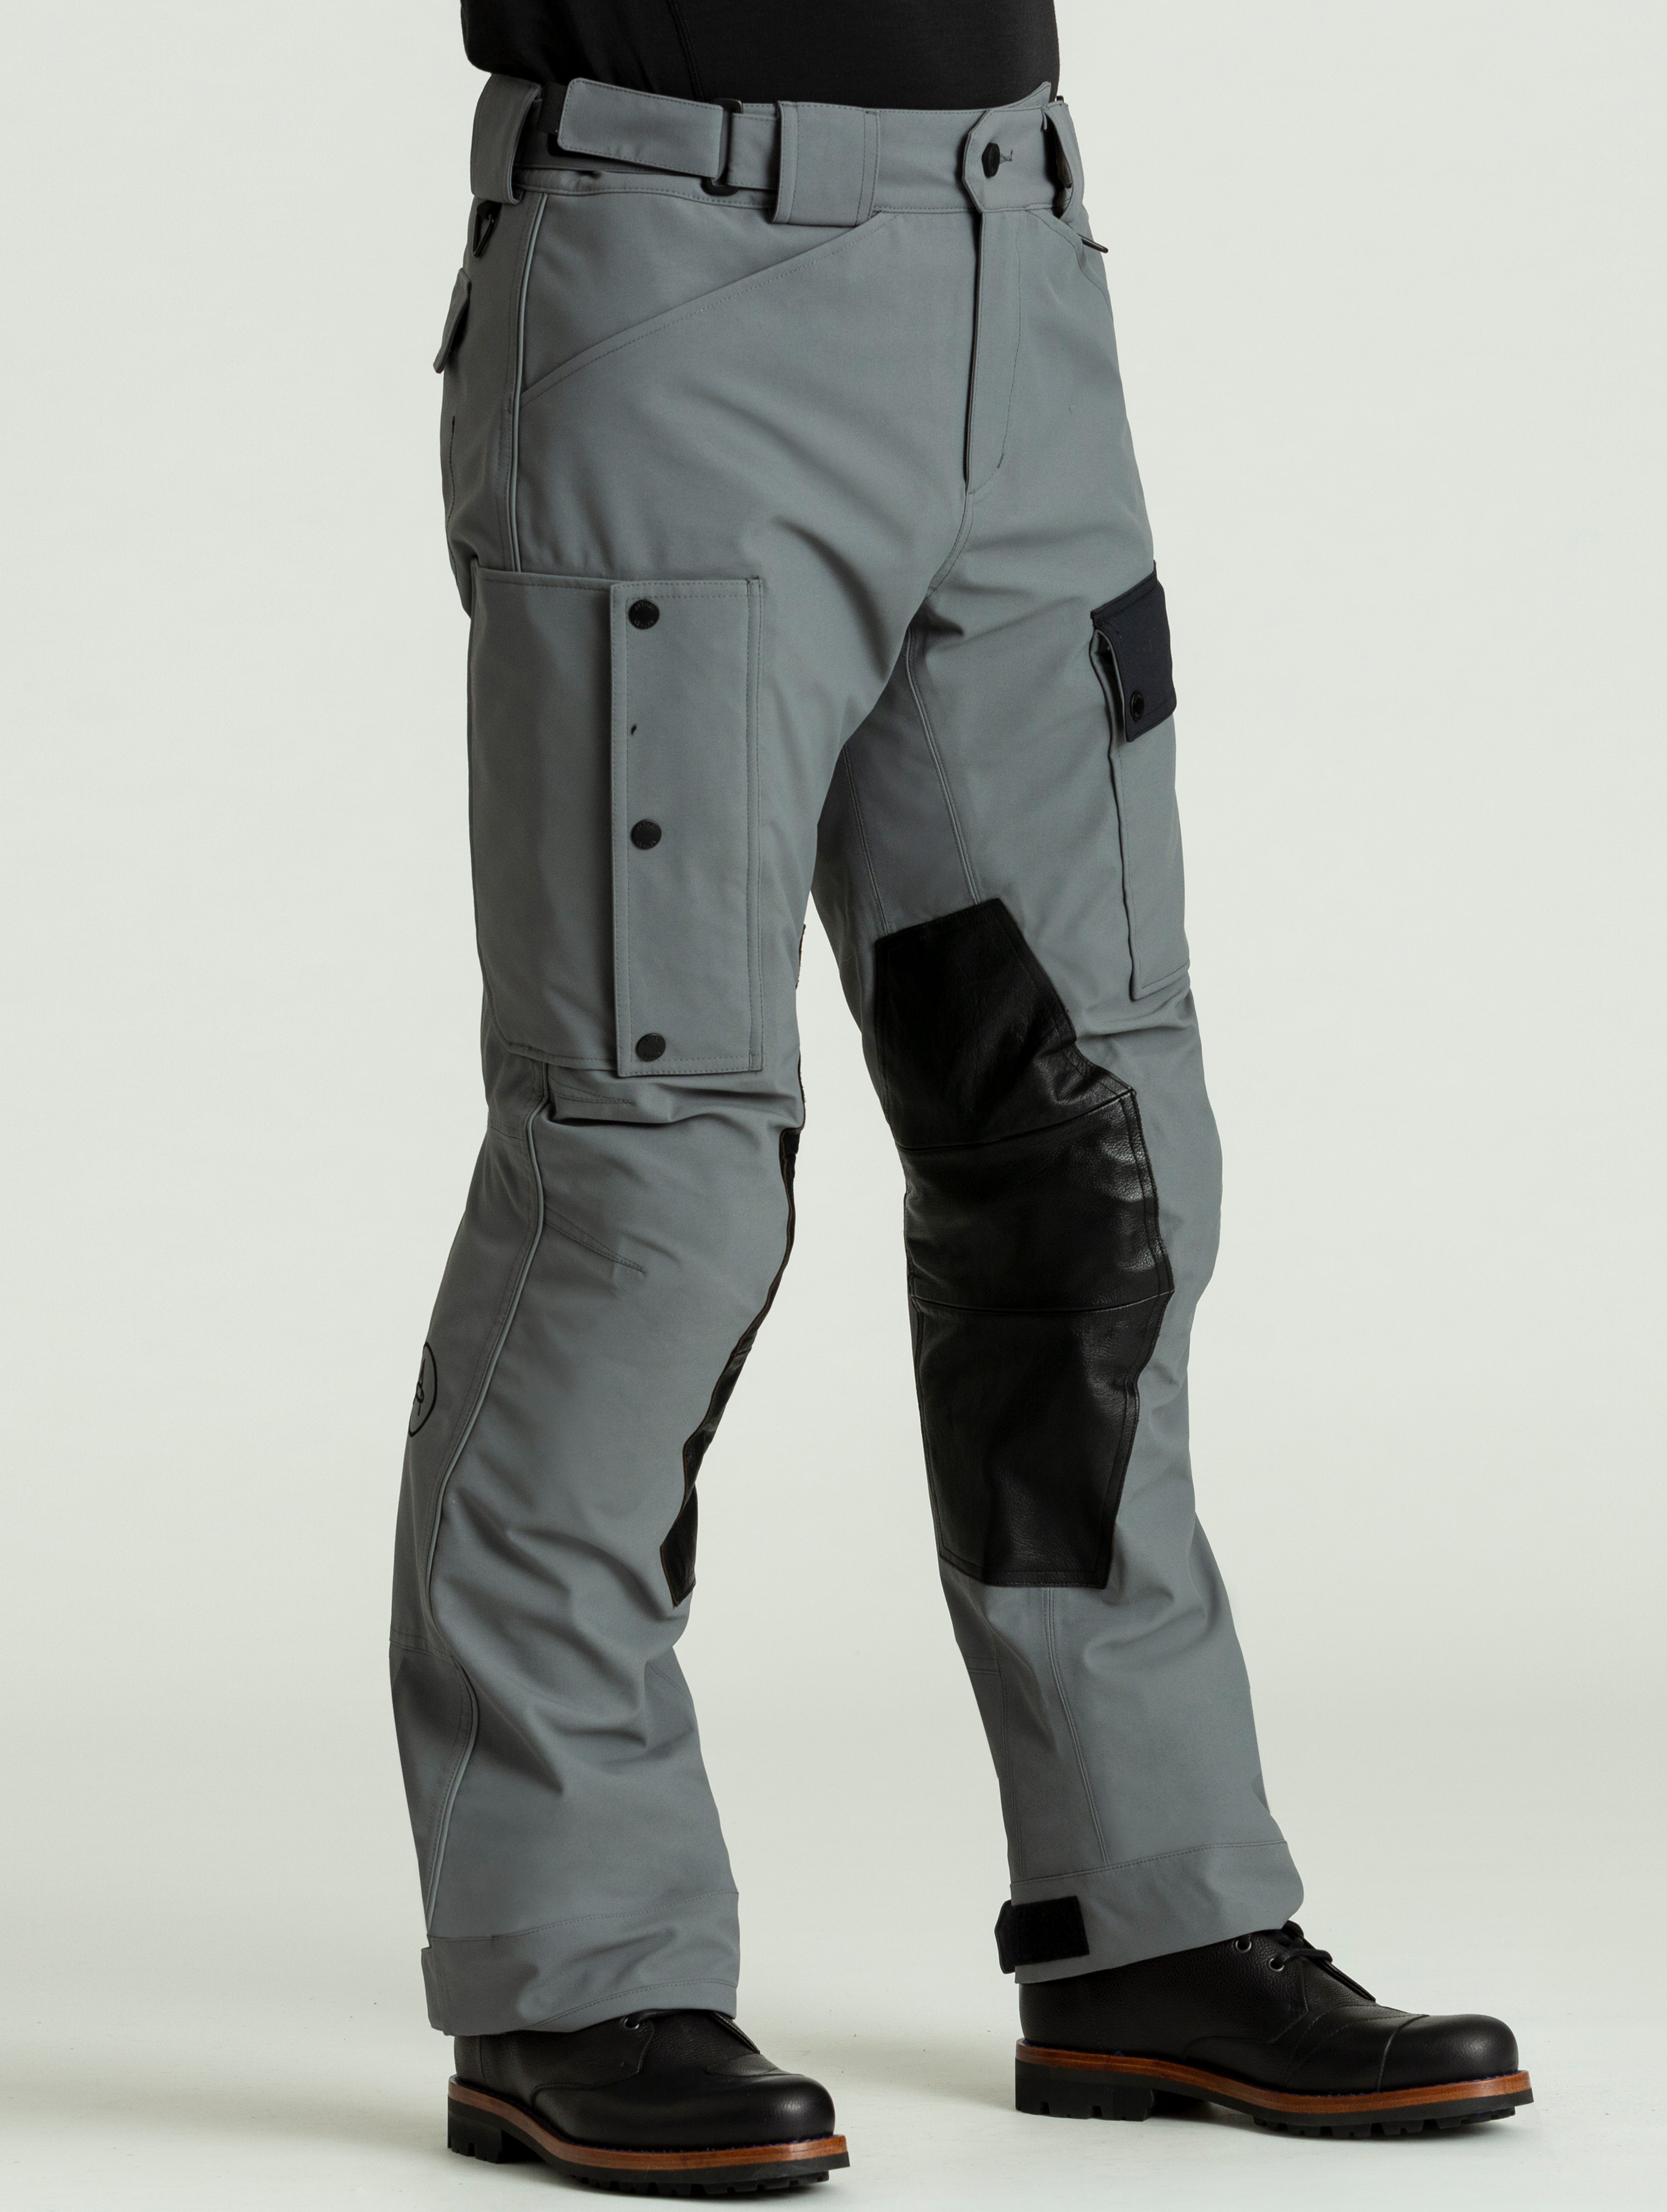 Divide Motorcycle Pant - Storm